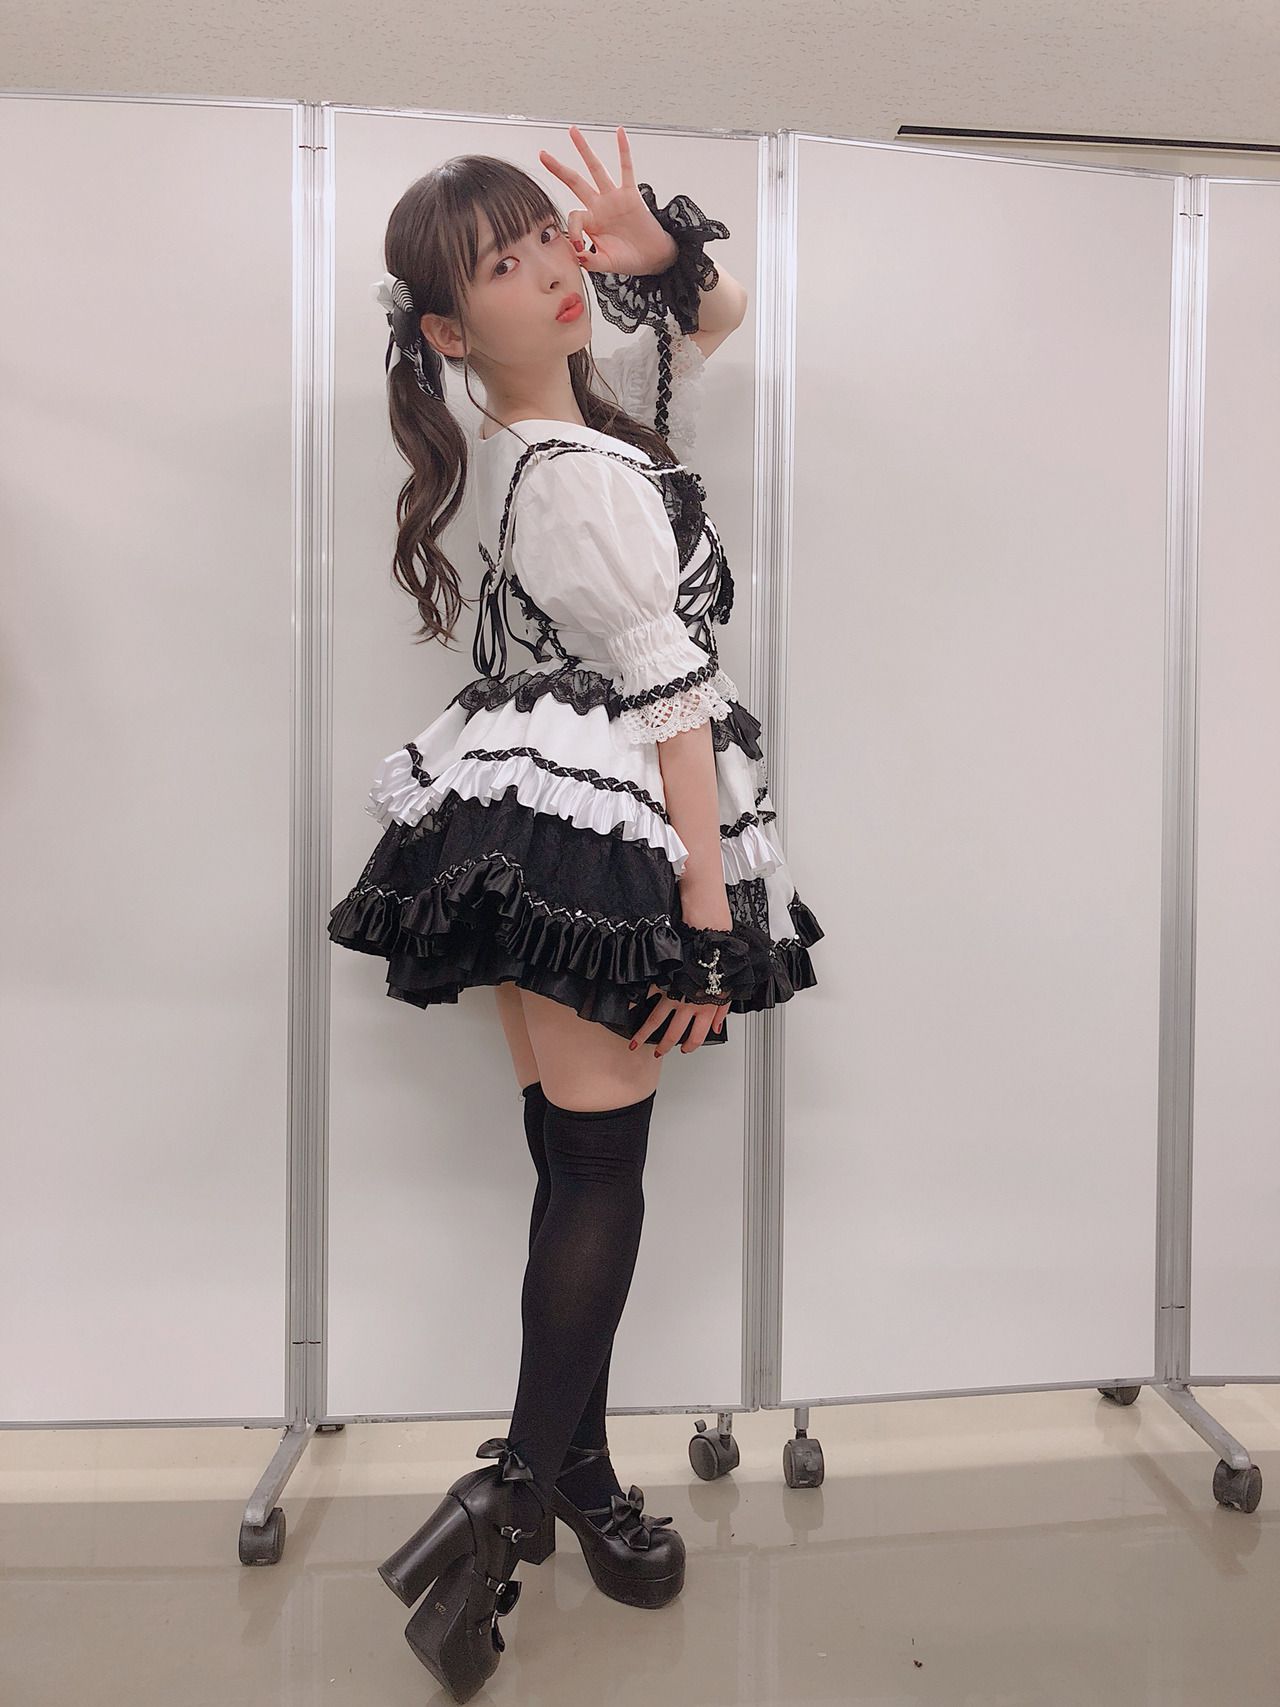 Sumire Uesaka "to emphasize the thigh... W] also erotic image offer Wwwwwww 19